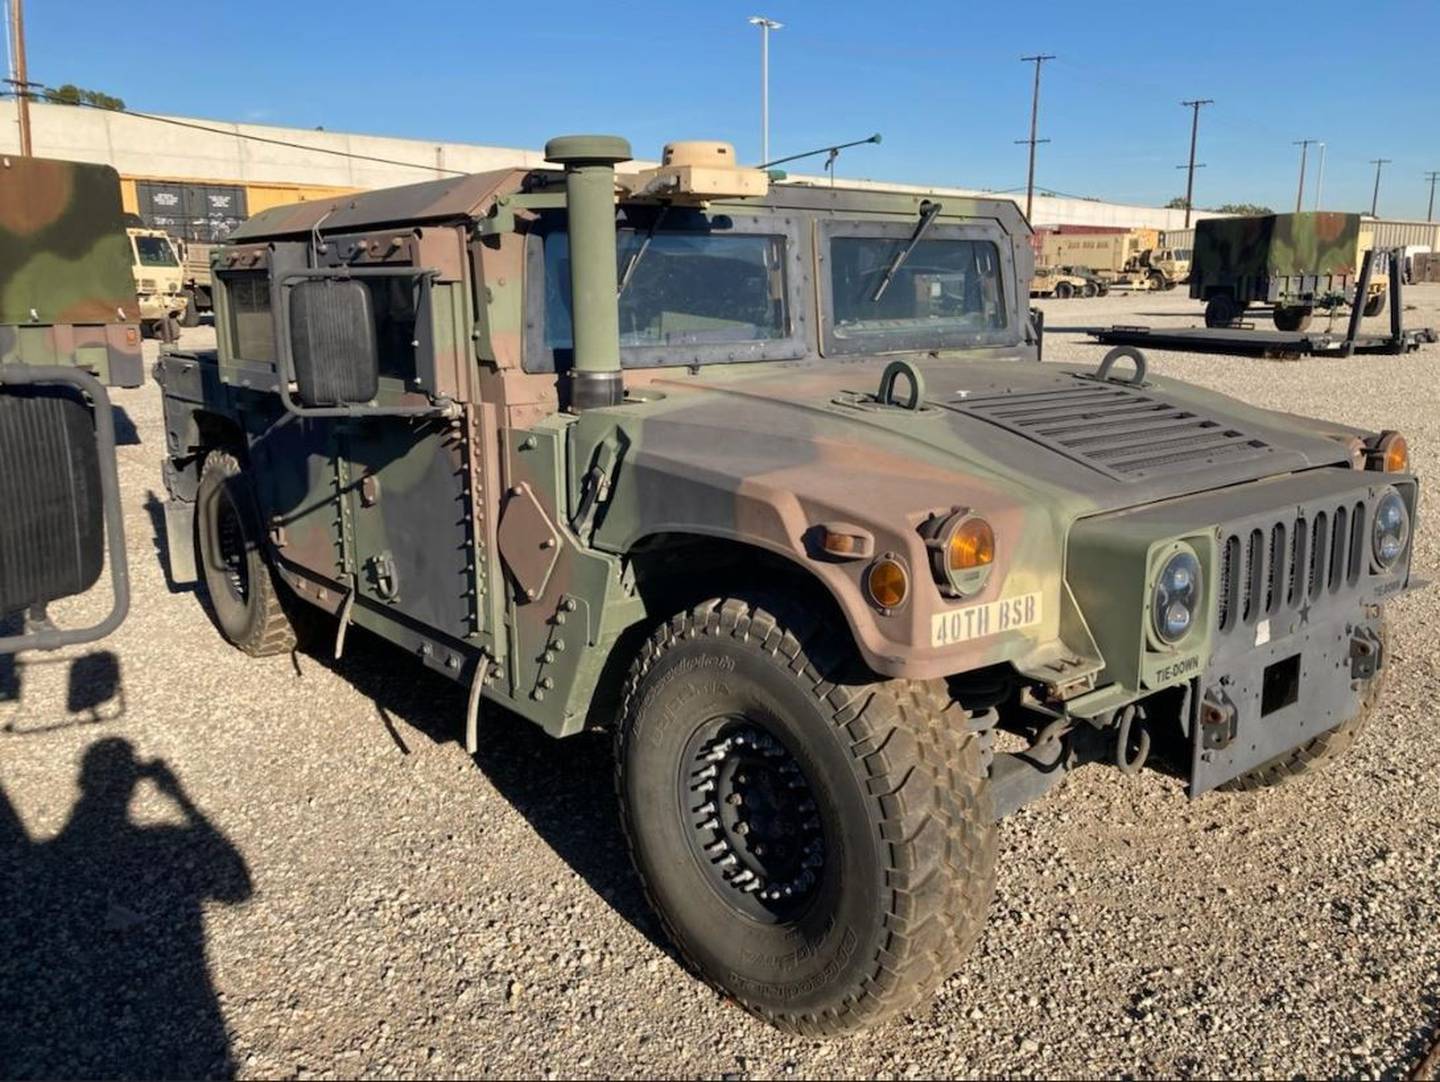 A military Humvee worth approximately $120,000 was stolen Jan. 15 from a military facility in Bell, Calif.